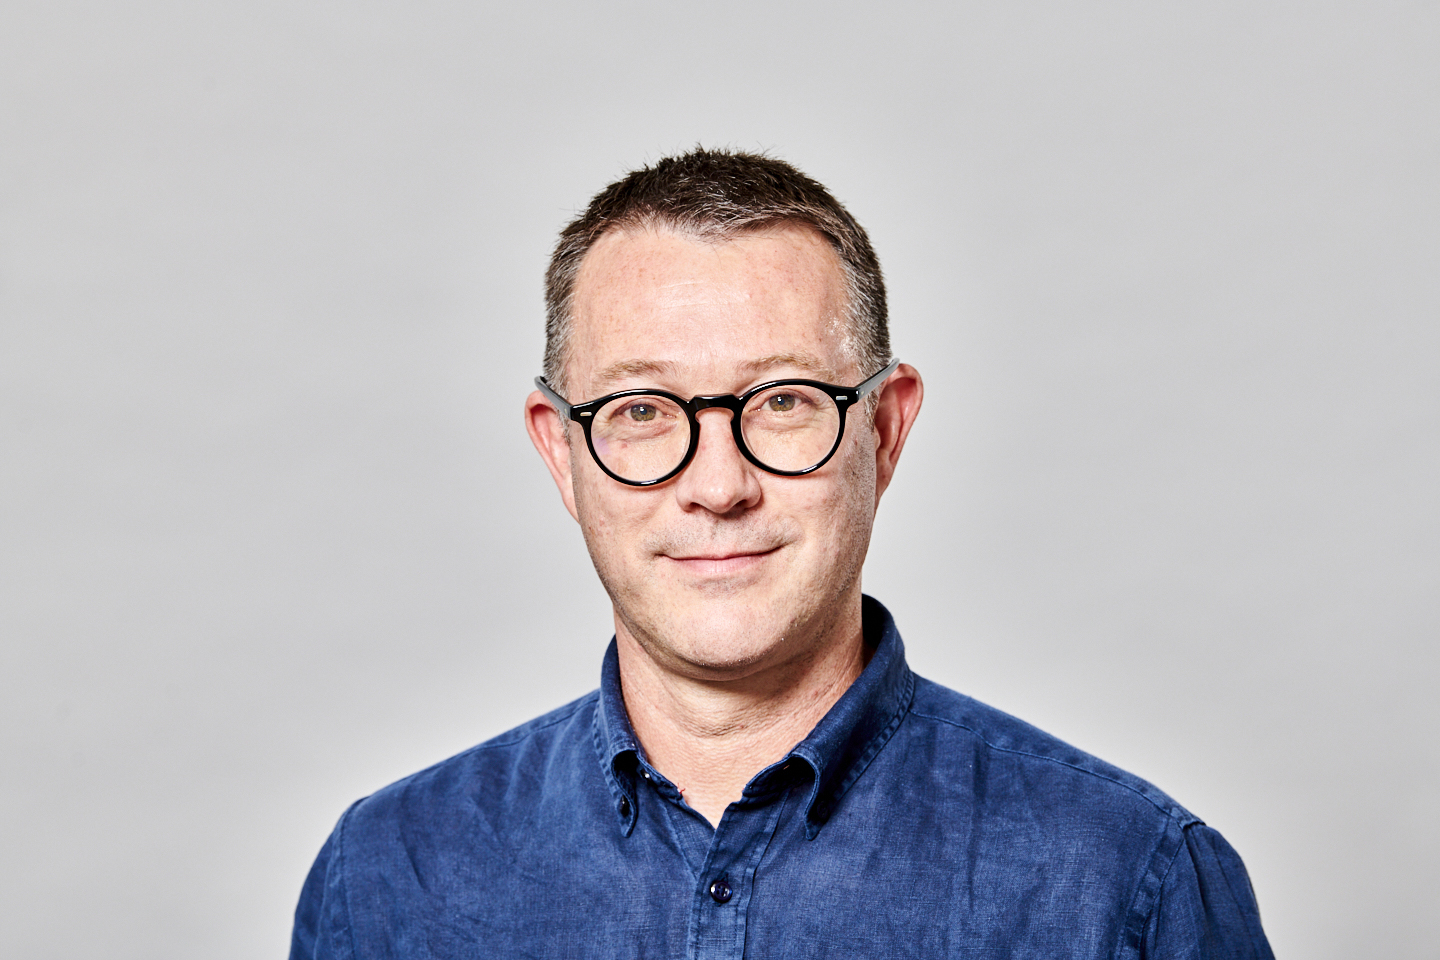 A headshot of Prof Martin Roderick against a neutral background